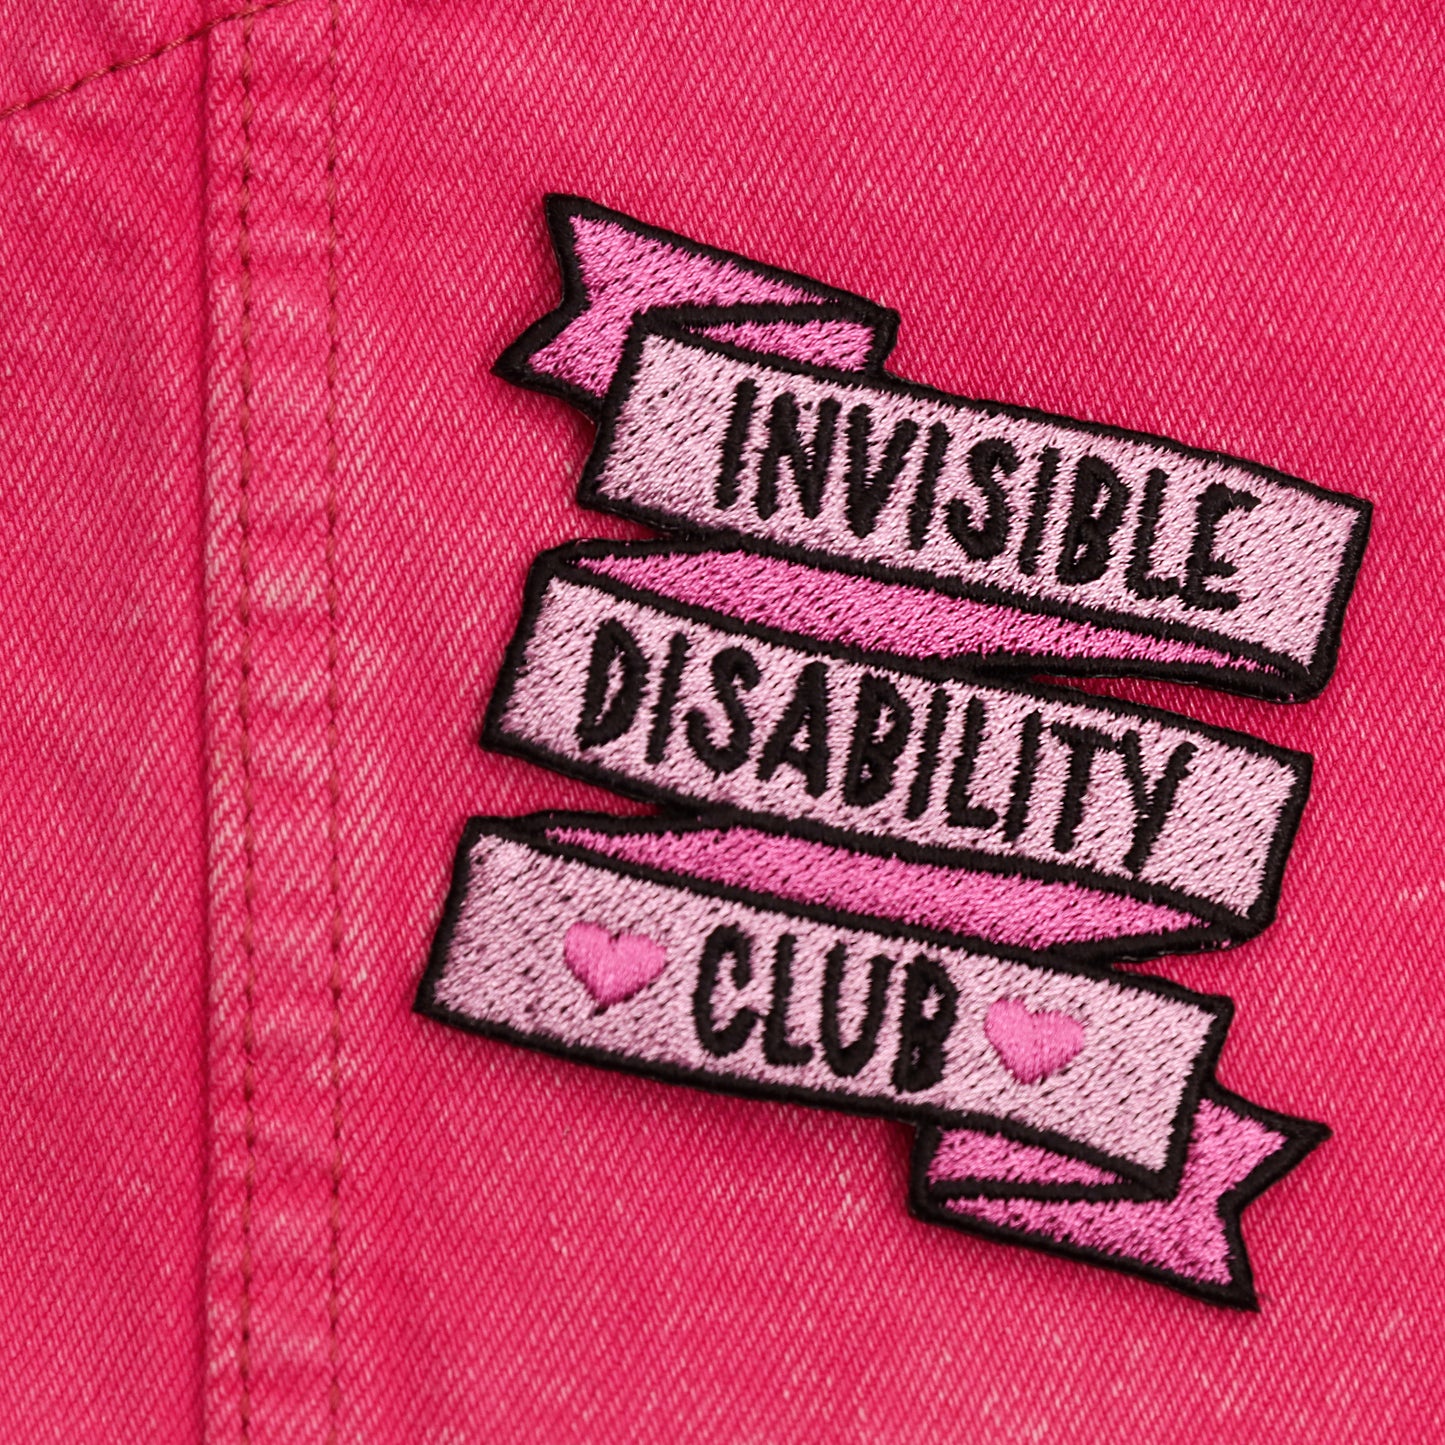 Invisible disability club embroidered flag  iron-on patch